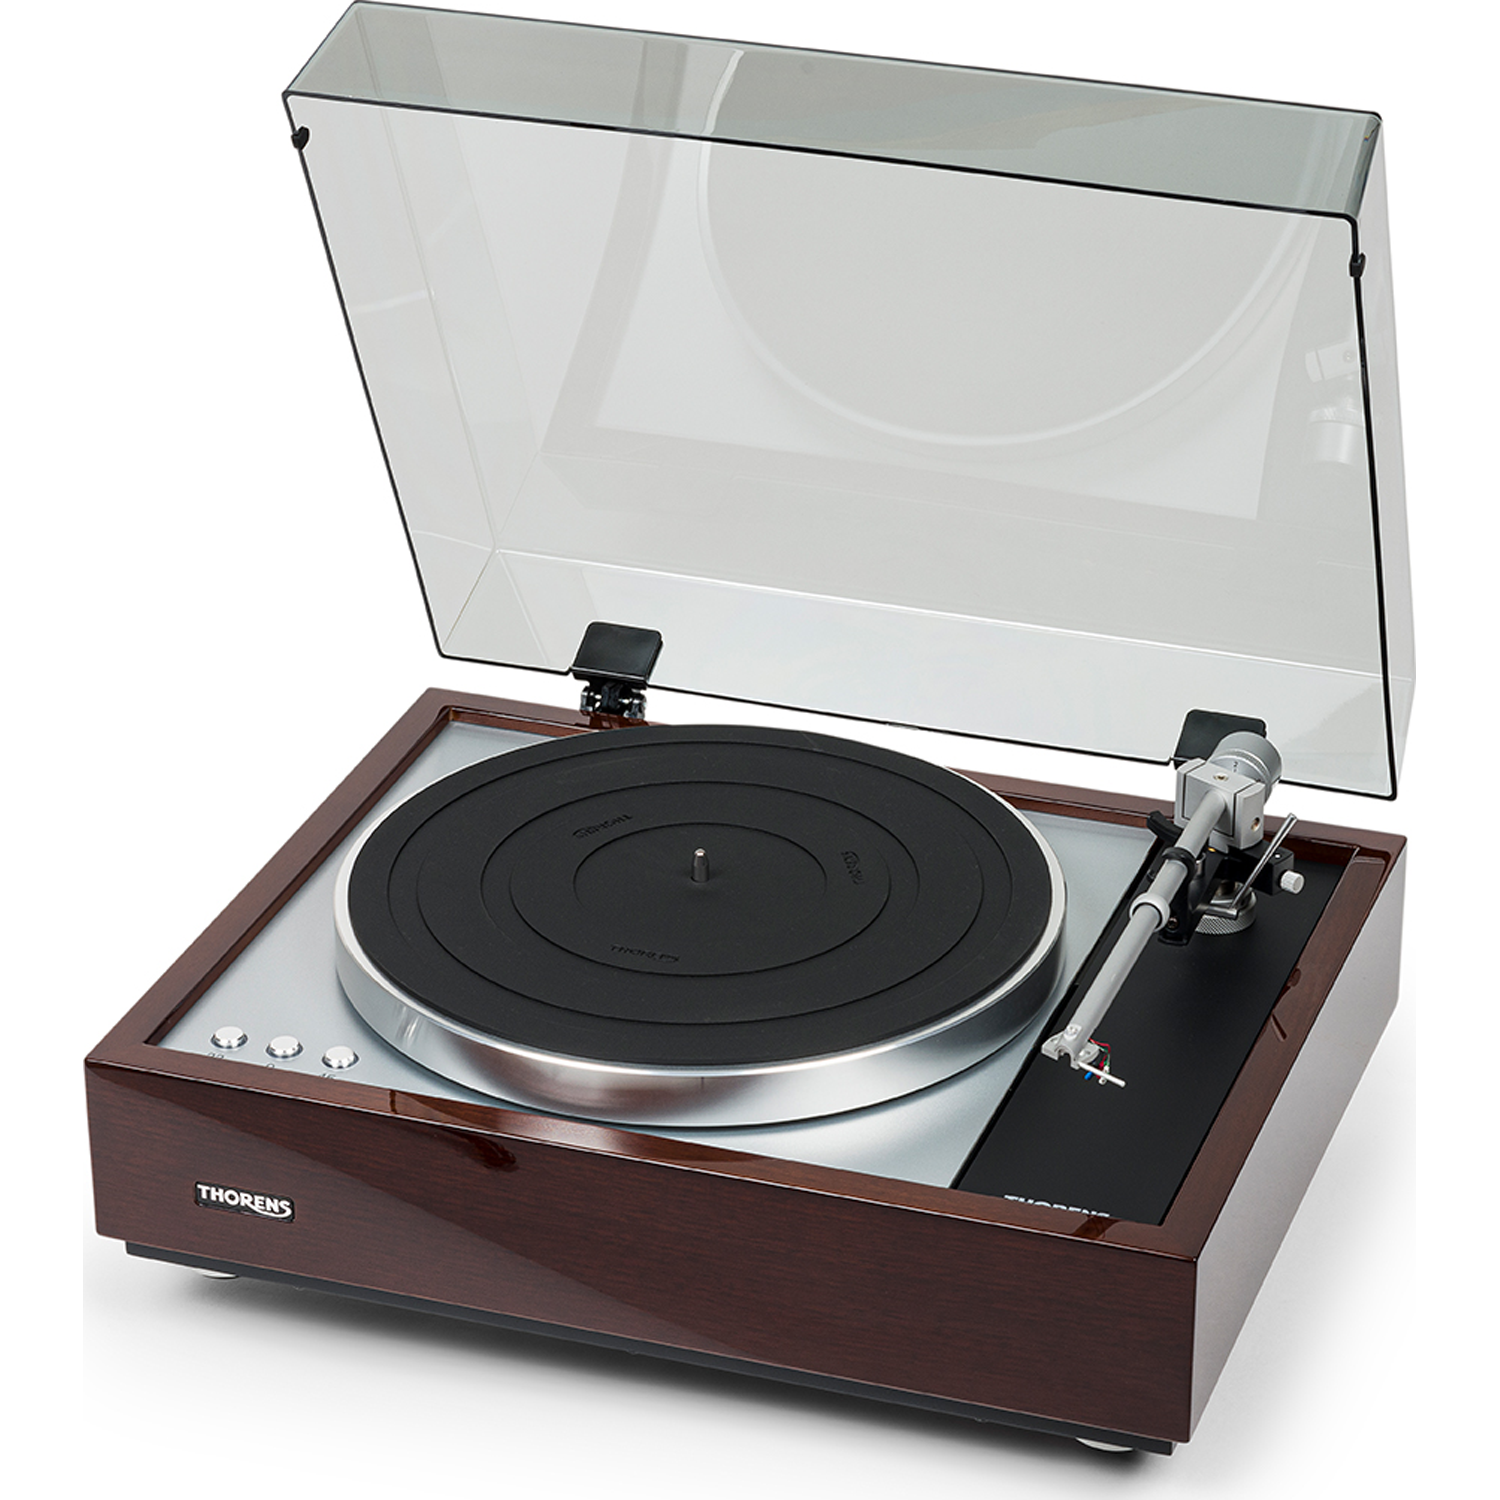 THORENS TD 1600 Fully Manual Two-Speed Stereo Turntable Walnut